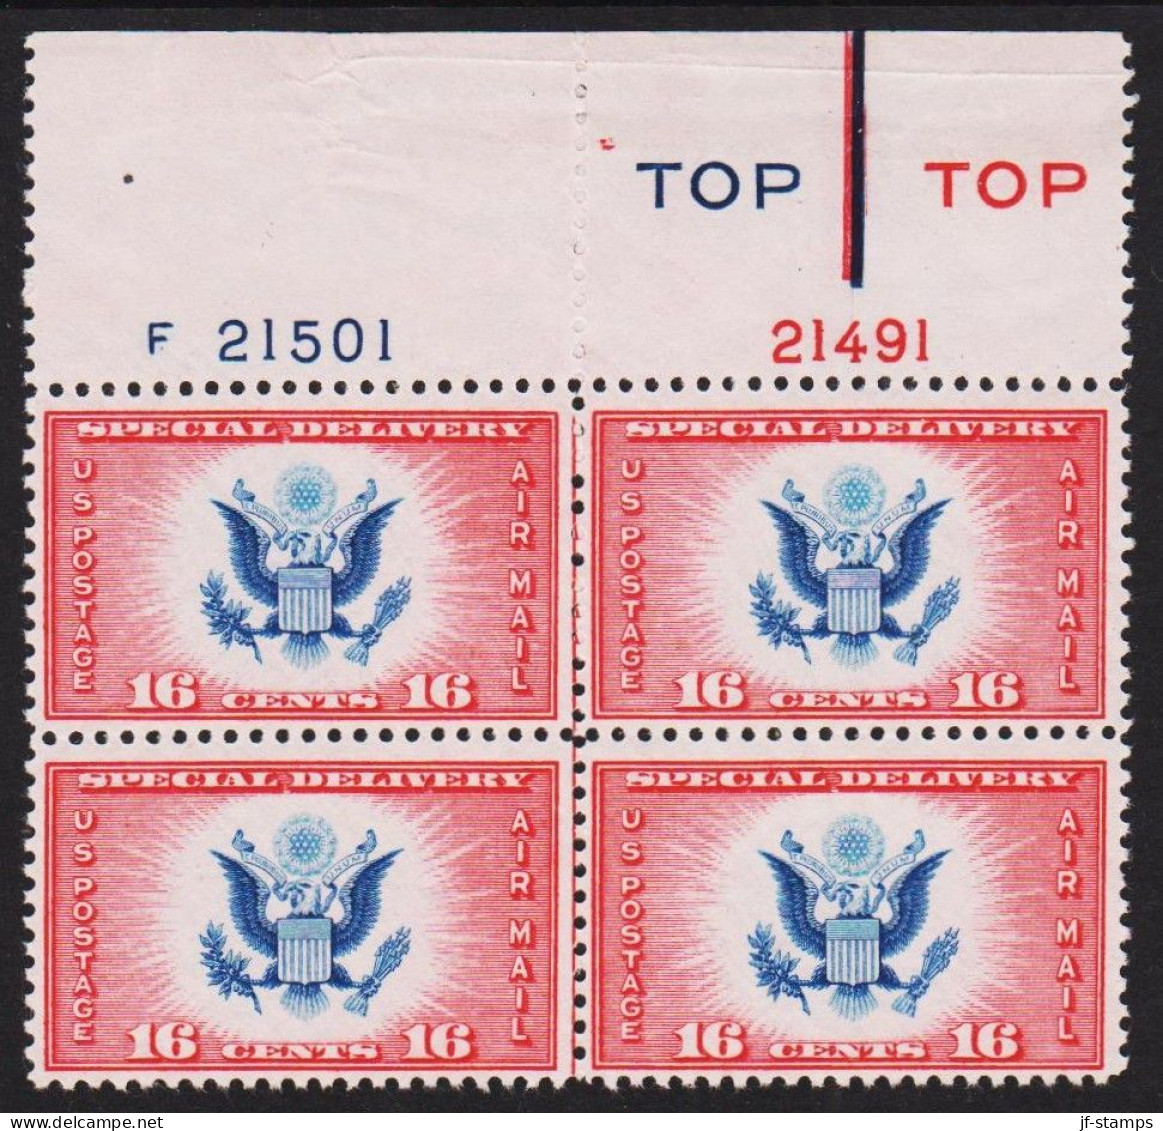 1936. USA. SPECIAL DELIVERY 16 CENTS 16. AIR MAIL, 4block Never Hinged.  Platenumber 21501 And 21491.  - JF542824 - Ungebraucht